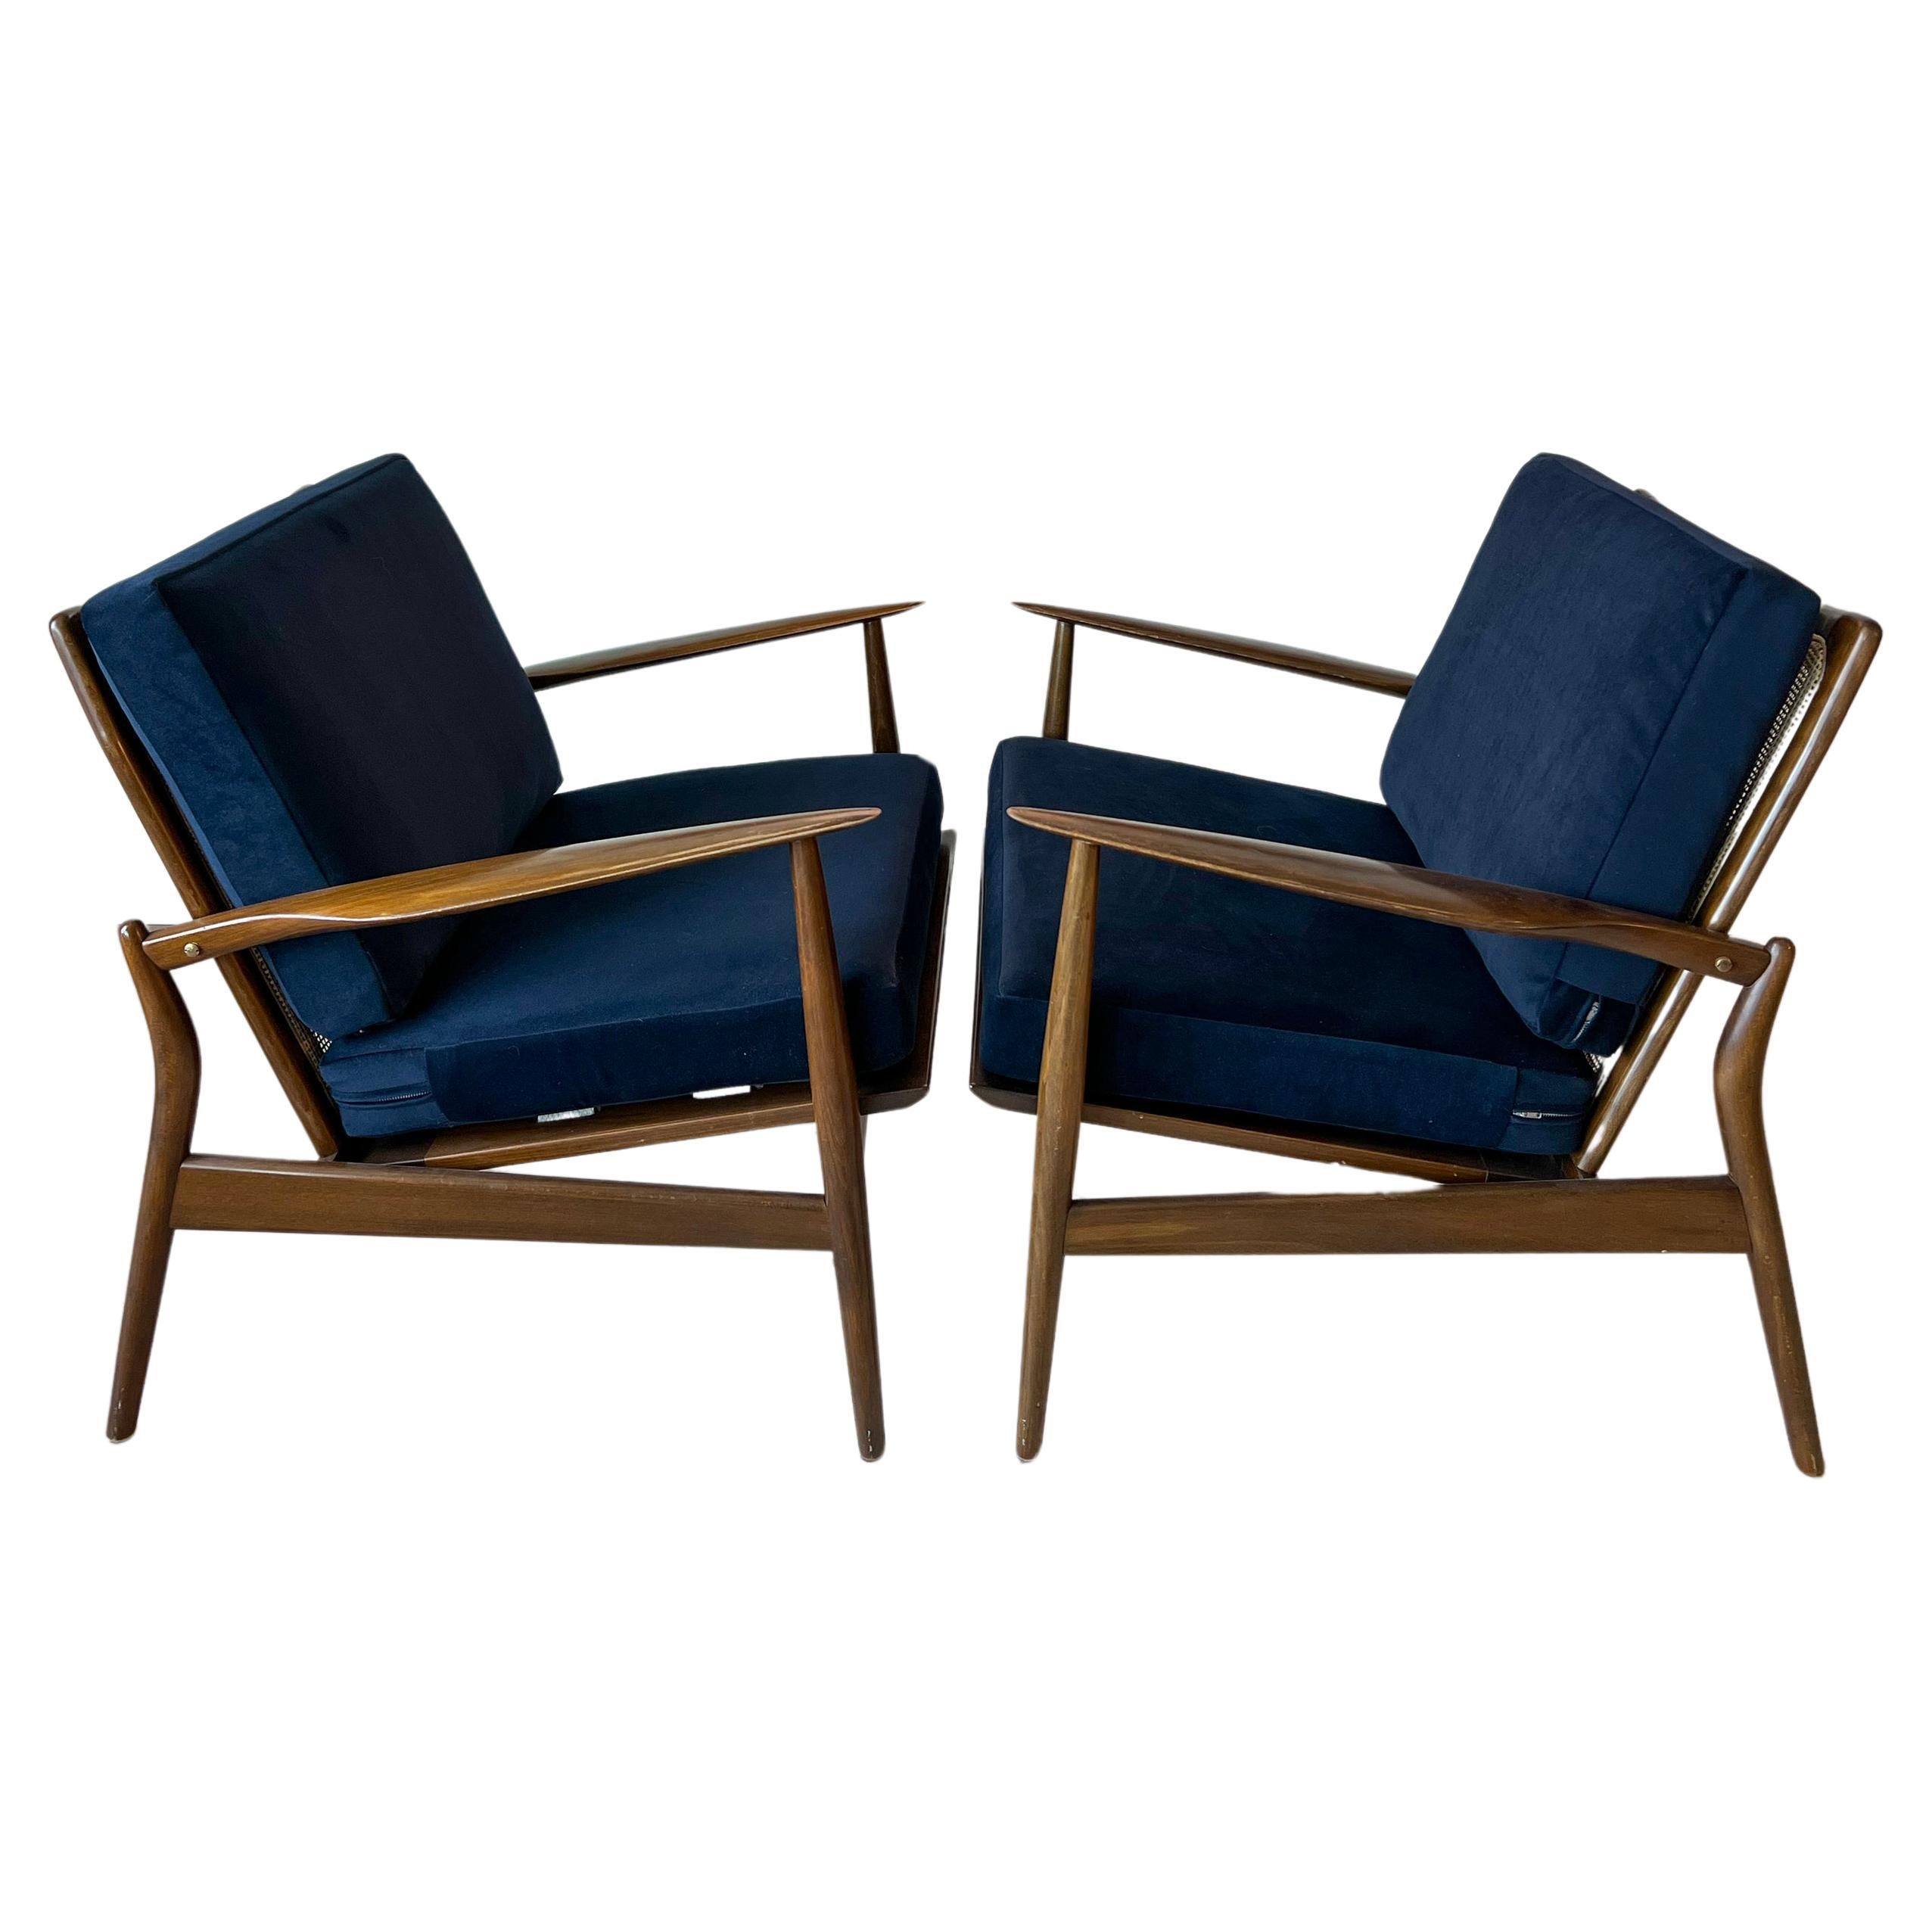 Pair of Vintage Spear Chairs by Kofod Larsen for Selig Denmark